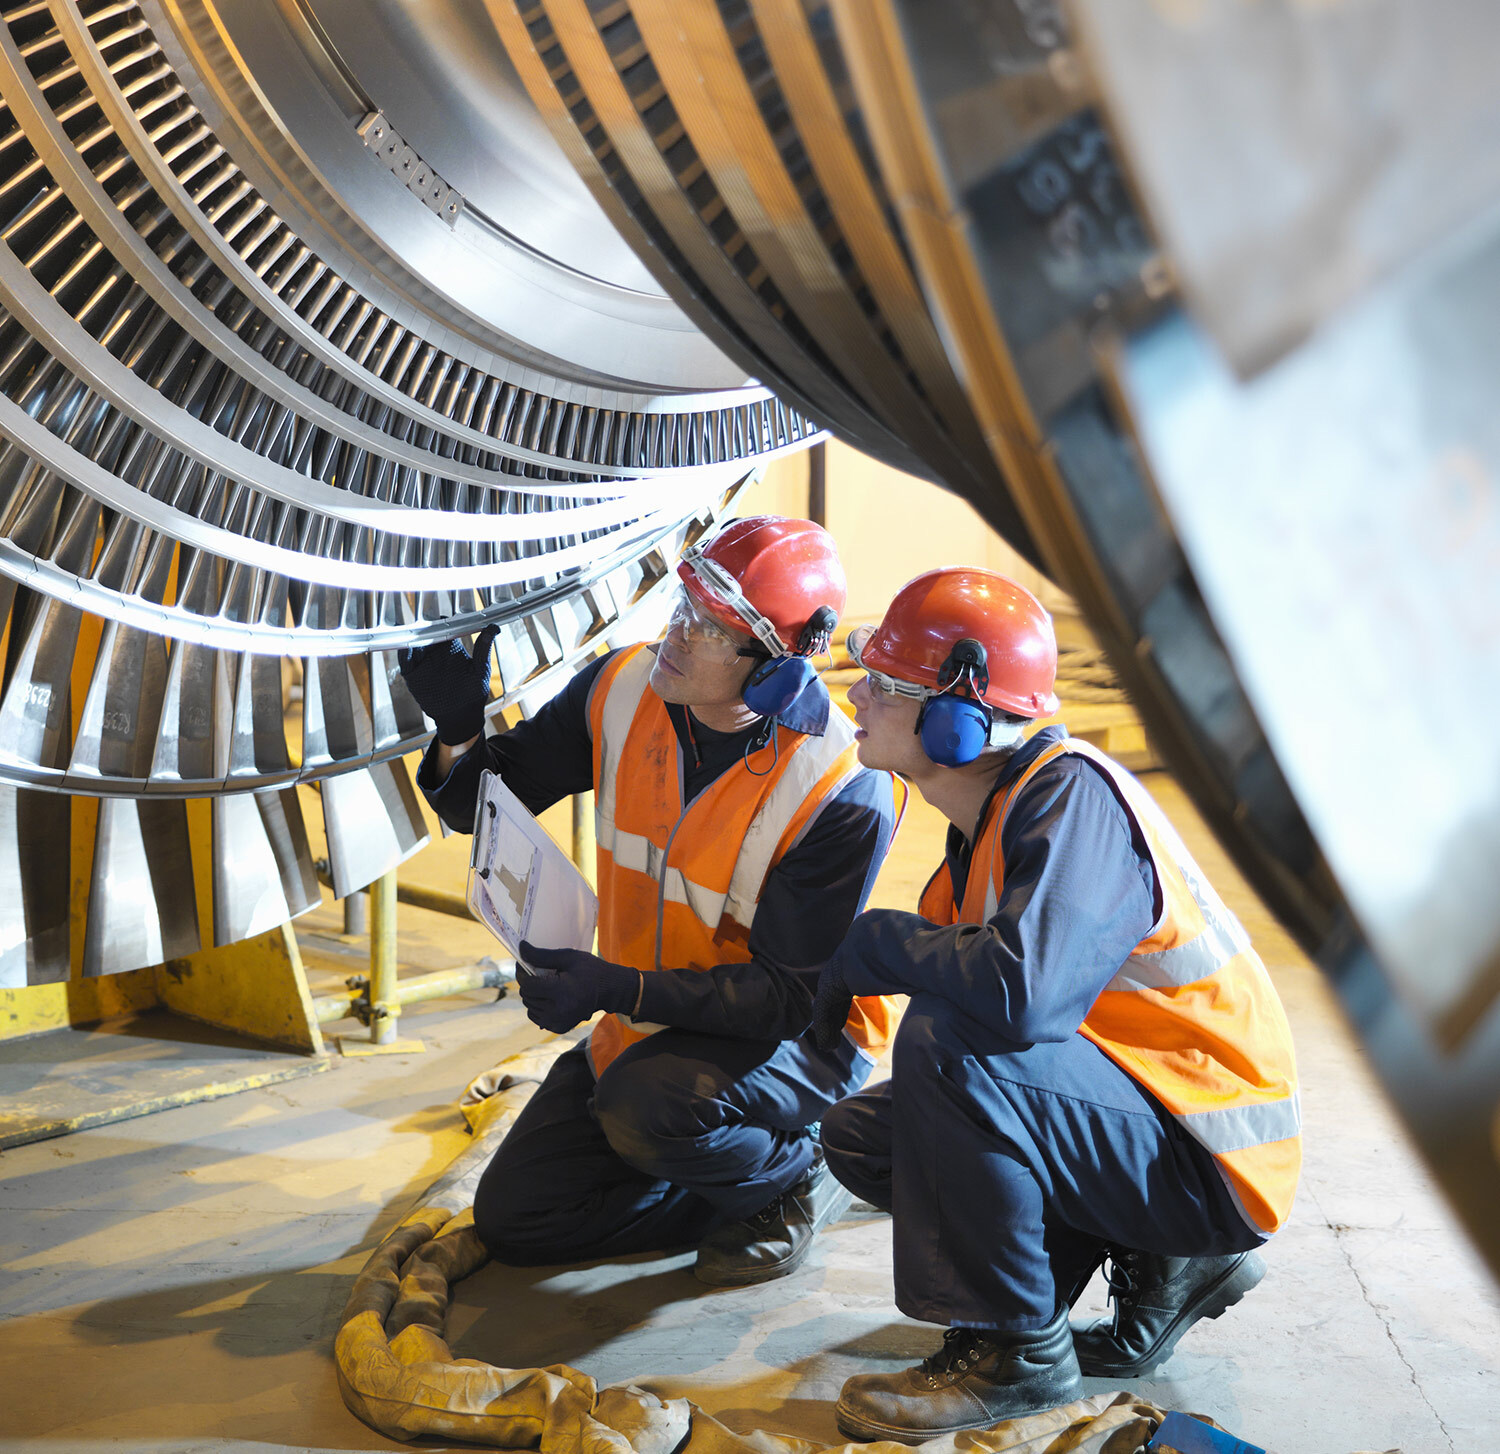 Two workers wearing safety gear inspecting a cargo ship engine component